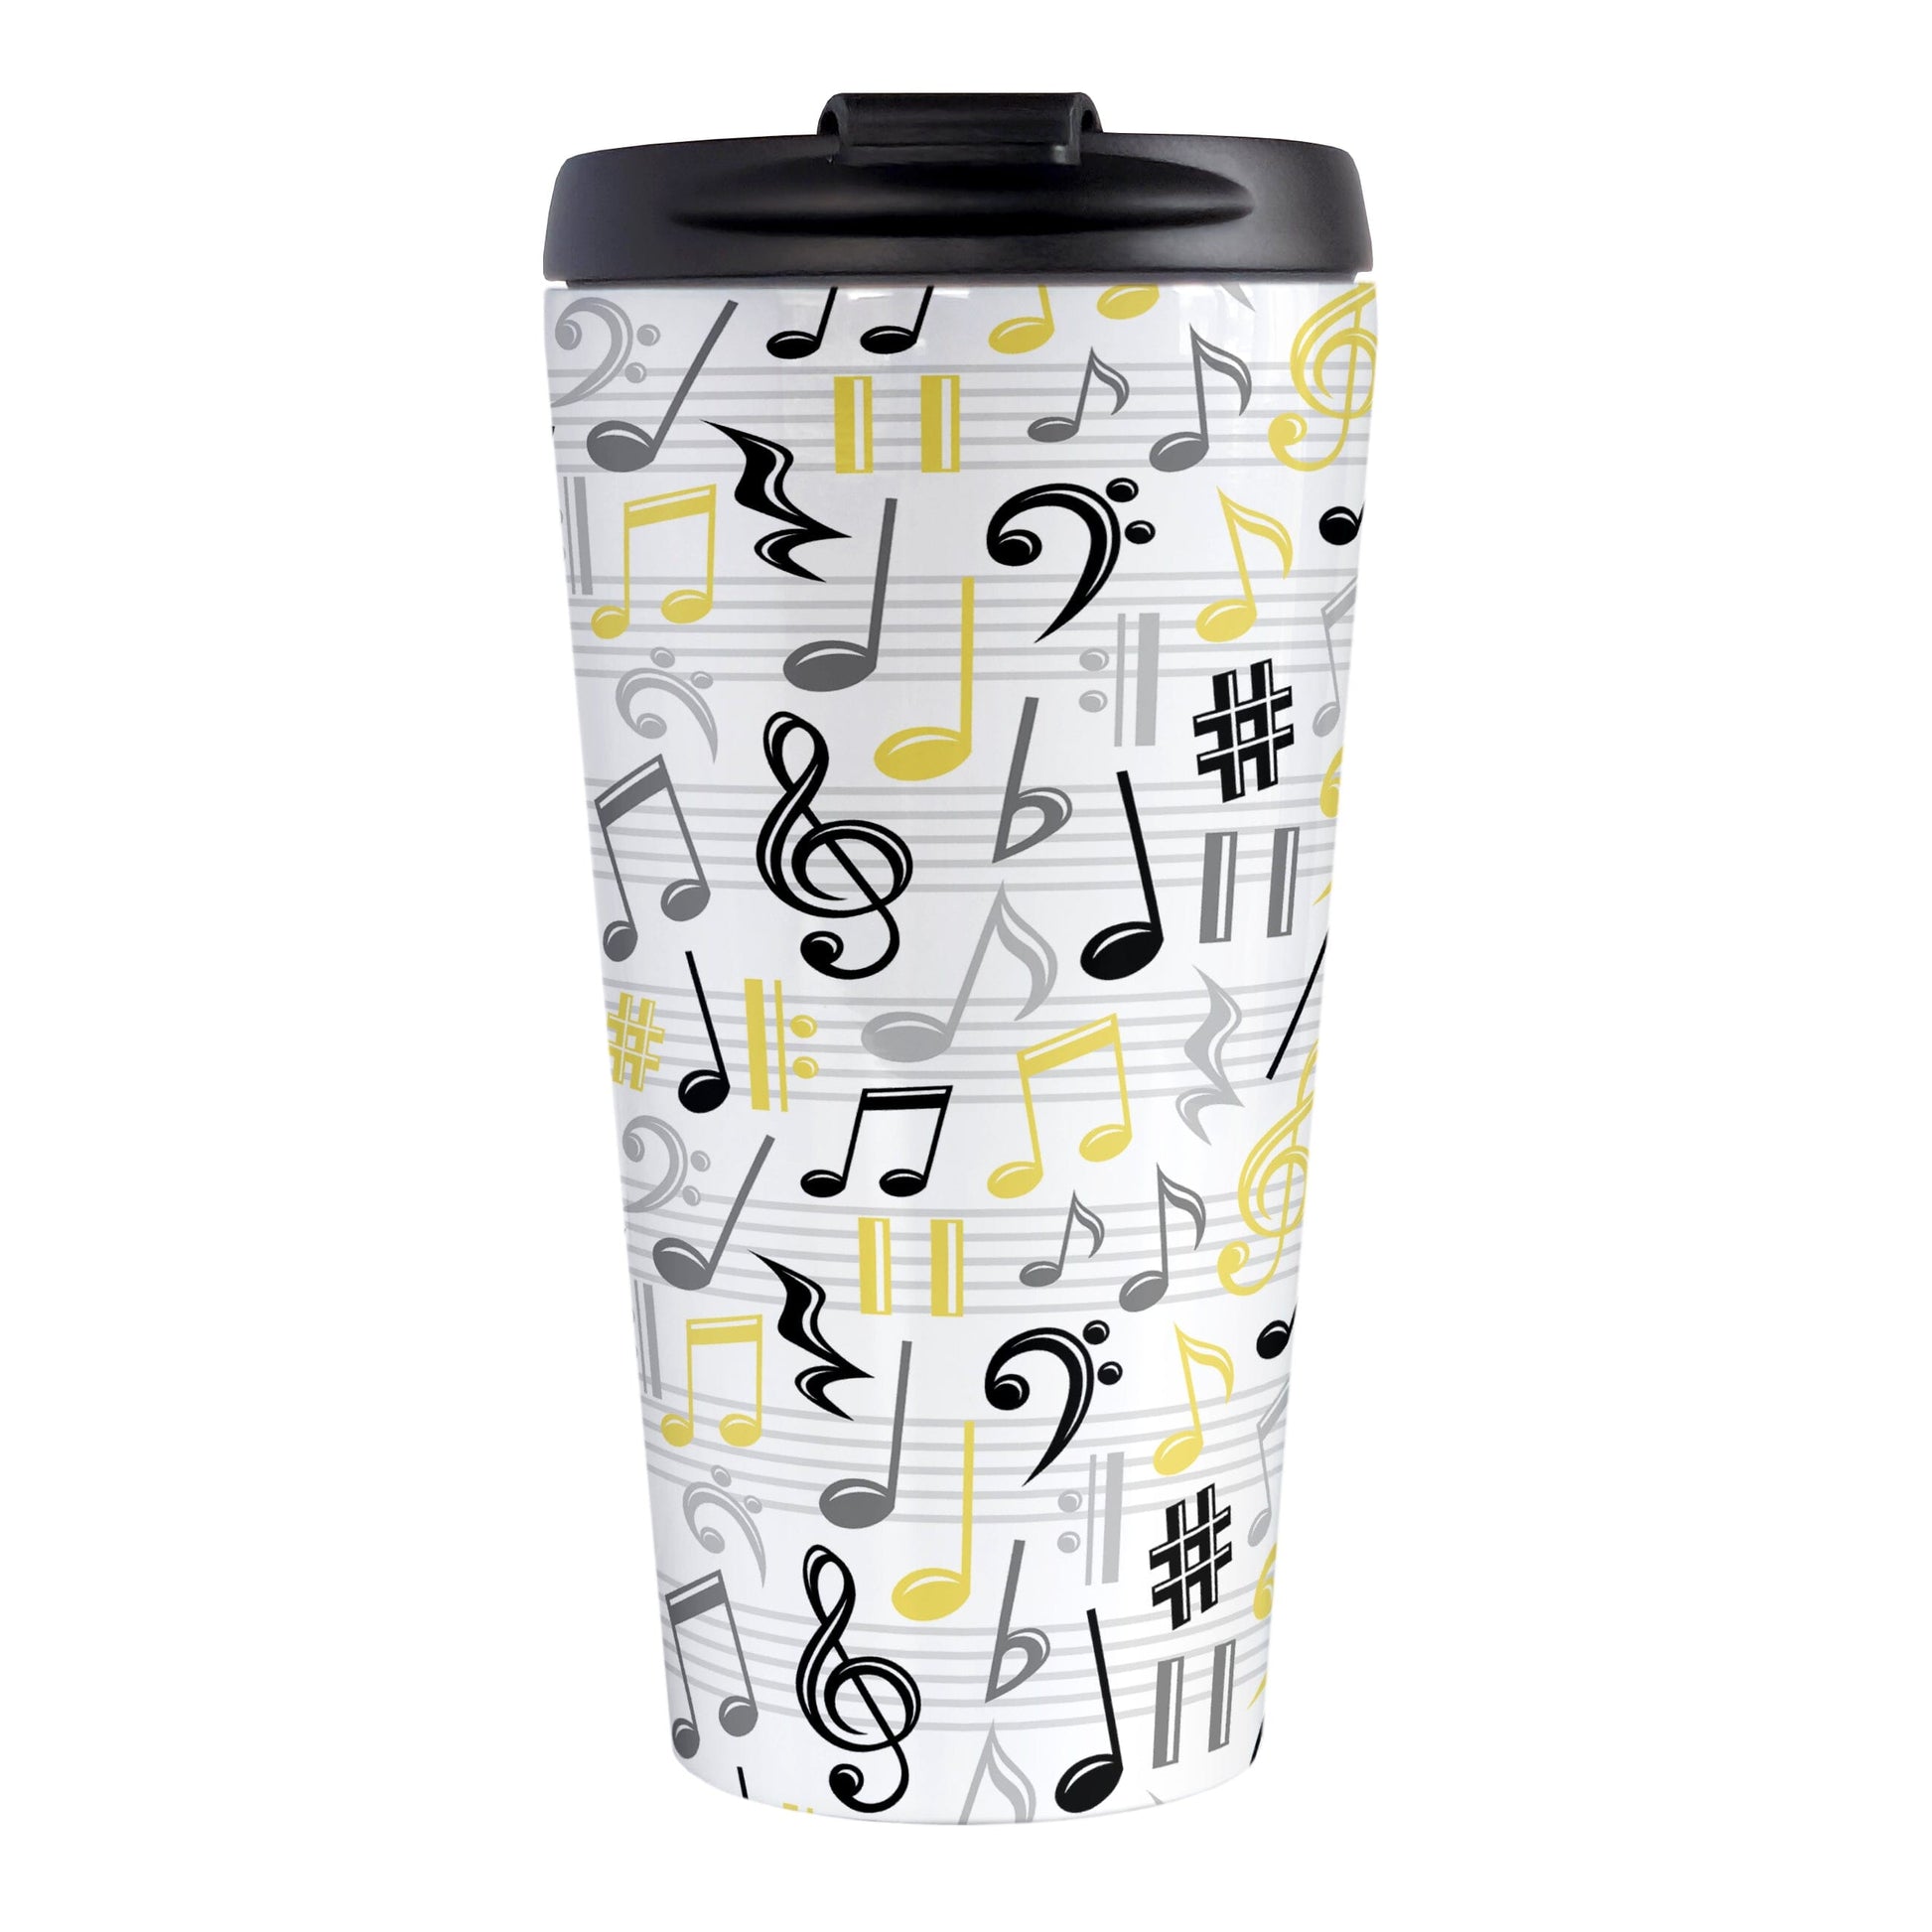 Yellow Music Notes Pattern Travel Mug (15oz) at Amy's Coffee Mugs. A stainless steel travel mug designed with music notes and symbols in yellow, black, and gray in a pattern that wraps around the travel mug.